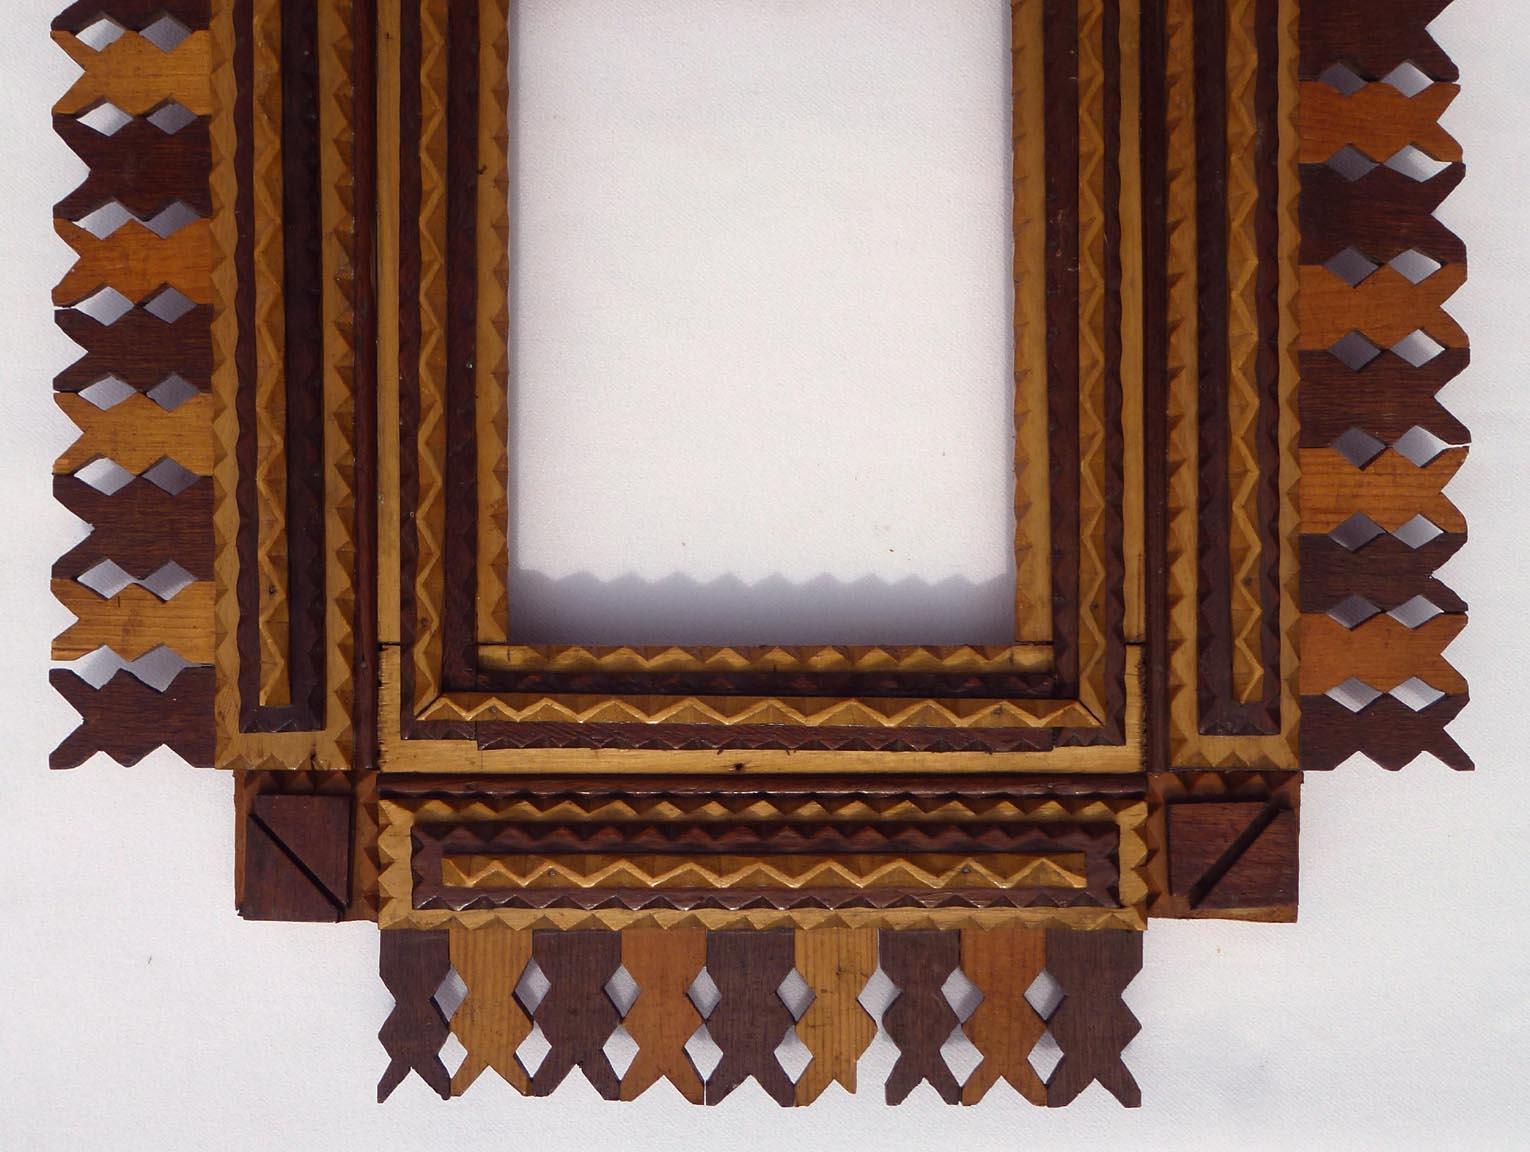 Mid-20th Century Tramp Art Frame with a Design of Light and Dark Woods, Pieced Openwork Border